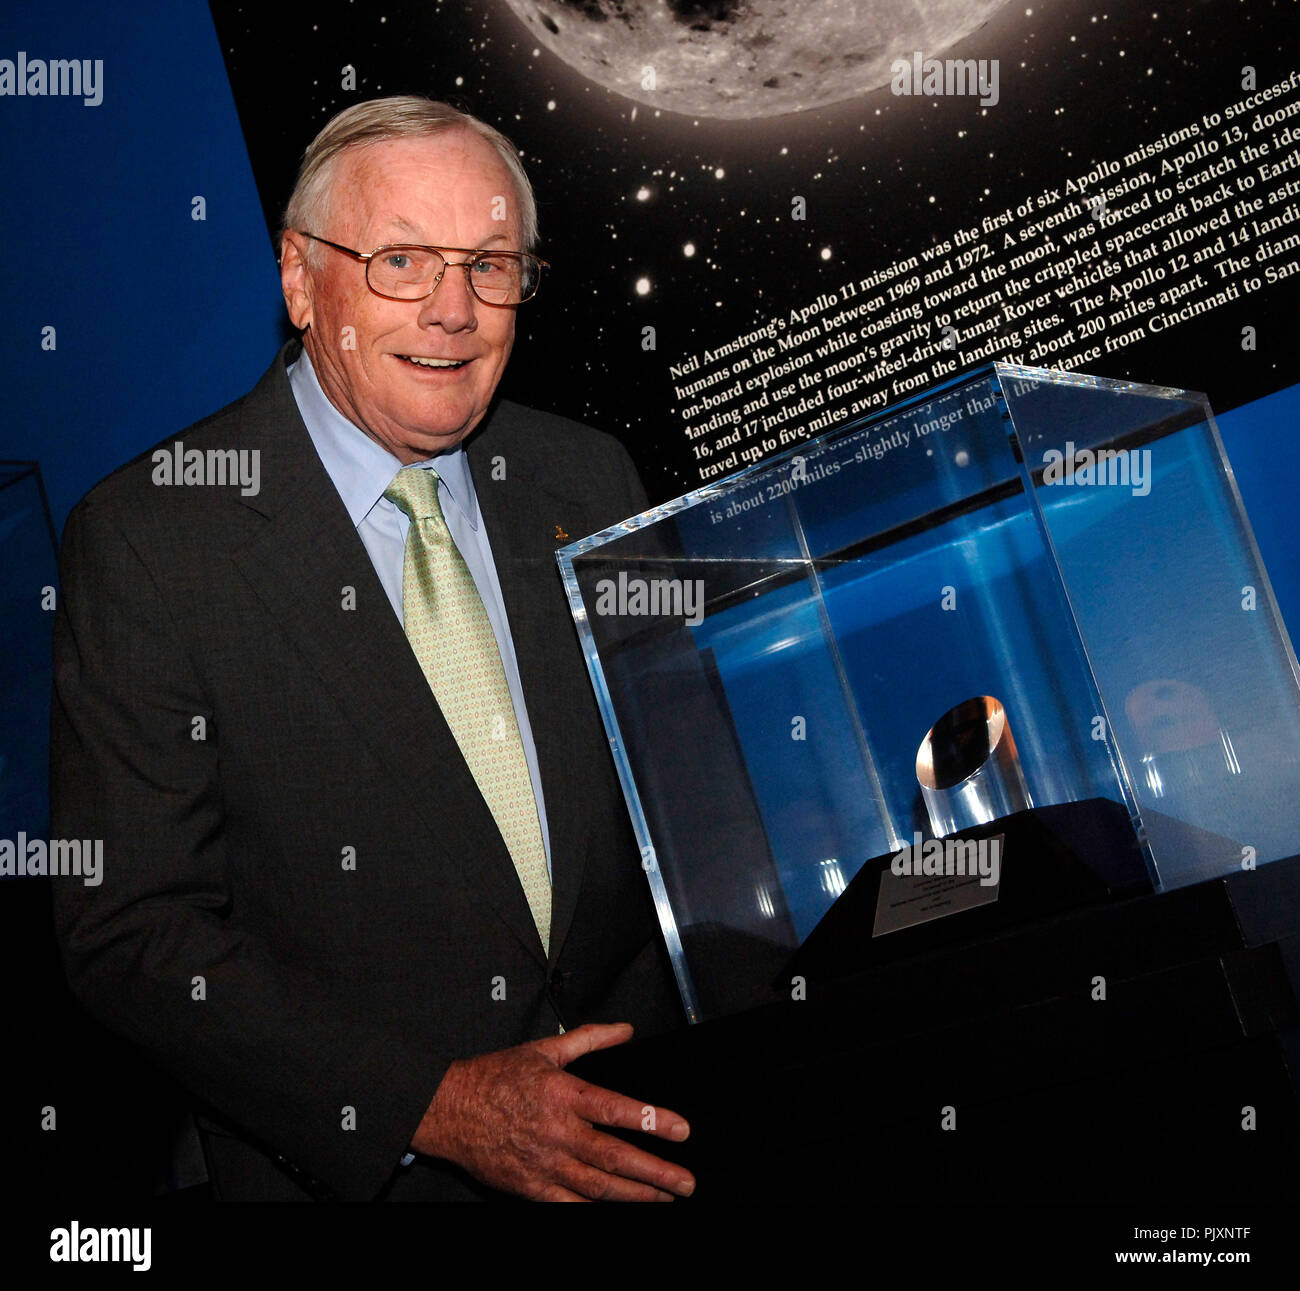 NASA Administrator Michael Griffin presented the NASA Ambassadors of Exploration award to Neil Armstrong (pictured).  Armstrong recived the award that includes a moon rock to recognize the sacrifices and dedication of the astronauts and others who were part of the Mercury, Gemini and .Apollo programs. A former naval aviator and NASA test pilot and Apollo 11 commander, Armstrong was the first human to ever land a spacecraft on the moon and the first to step on the lunar surface.  Armstrong's award will be displayed at the Cincinnati Museum Center at Union Terminal.   Tuesday, April 18, 2006.  C Stock Photo